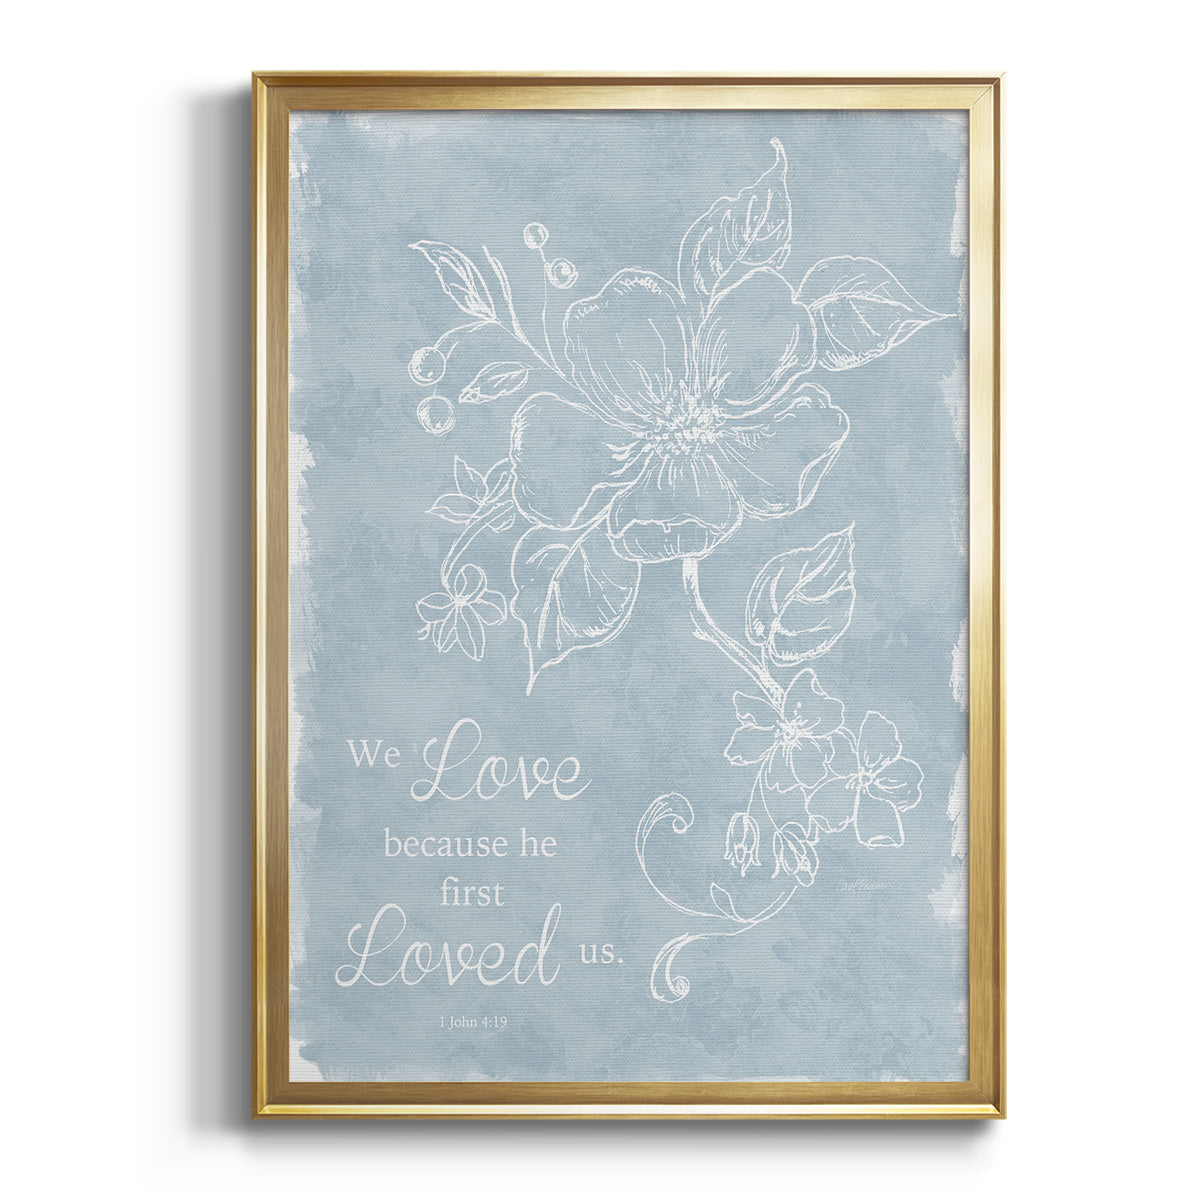 Loved Us First Premium Framed Print - Ready to Hang